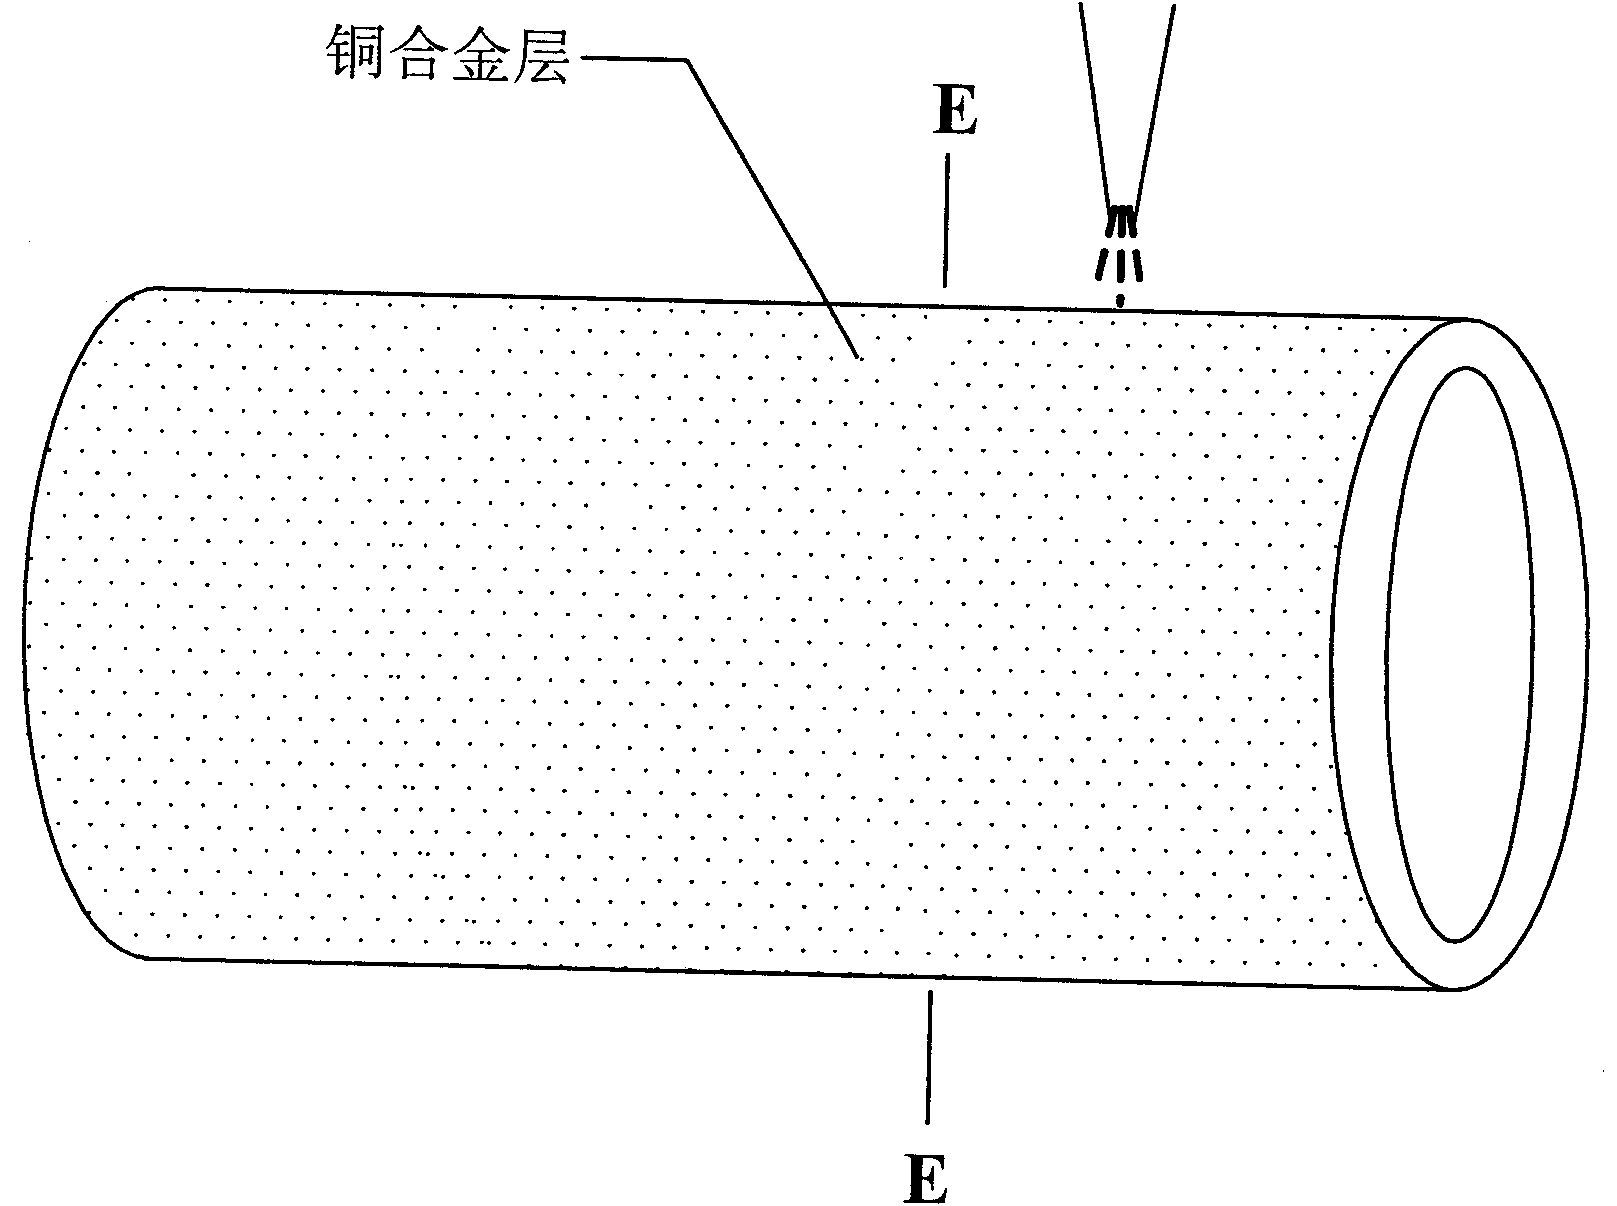 Method for cladding copper alloy layer on surface of steel substrate by laser brazing